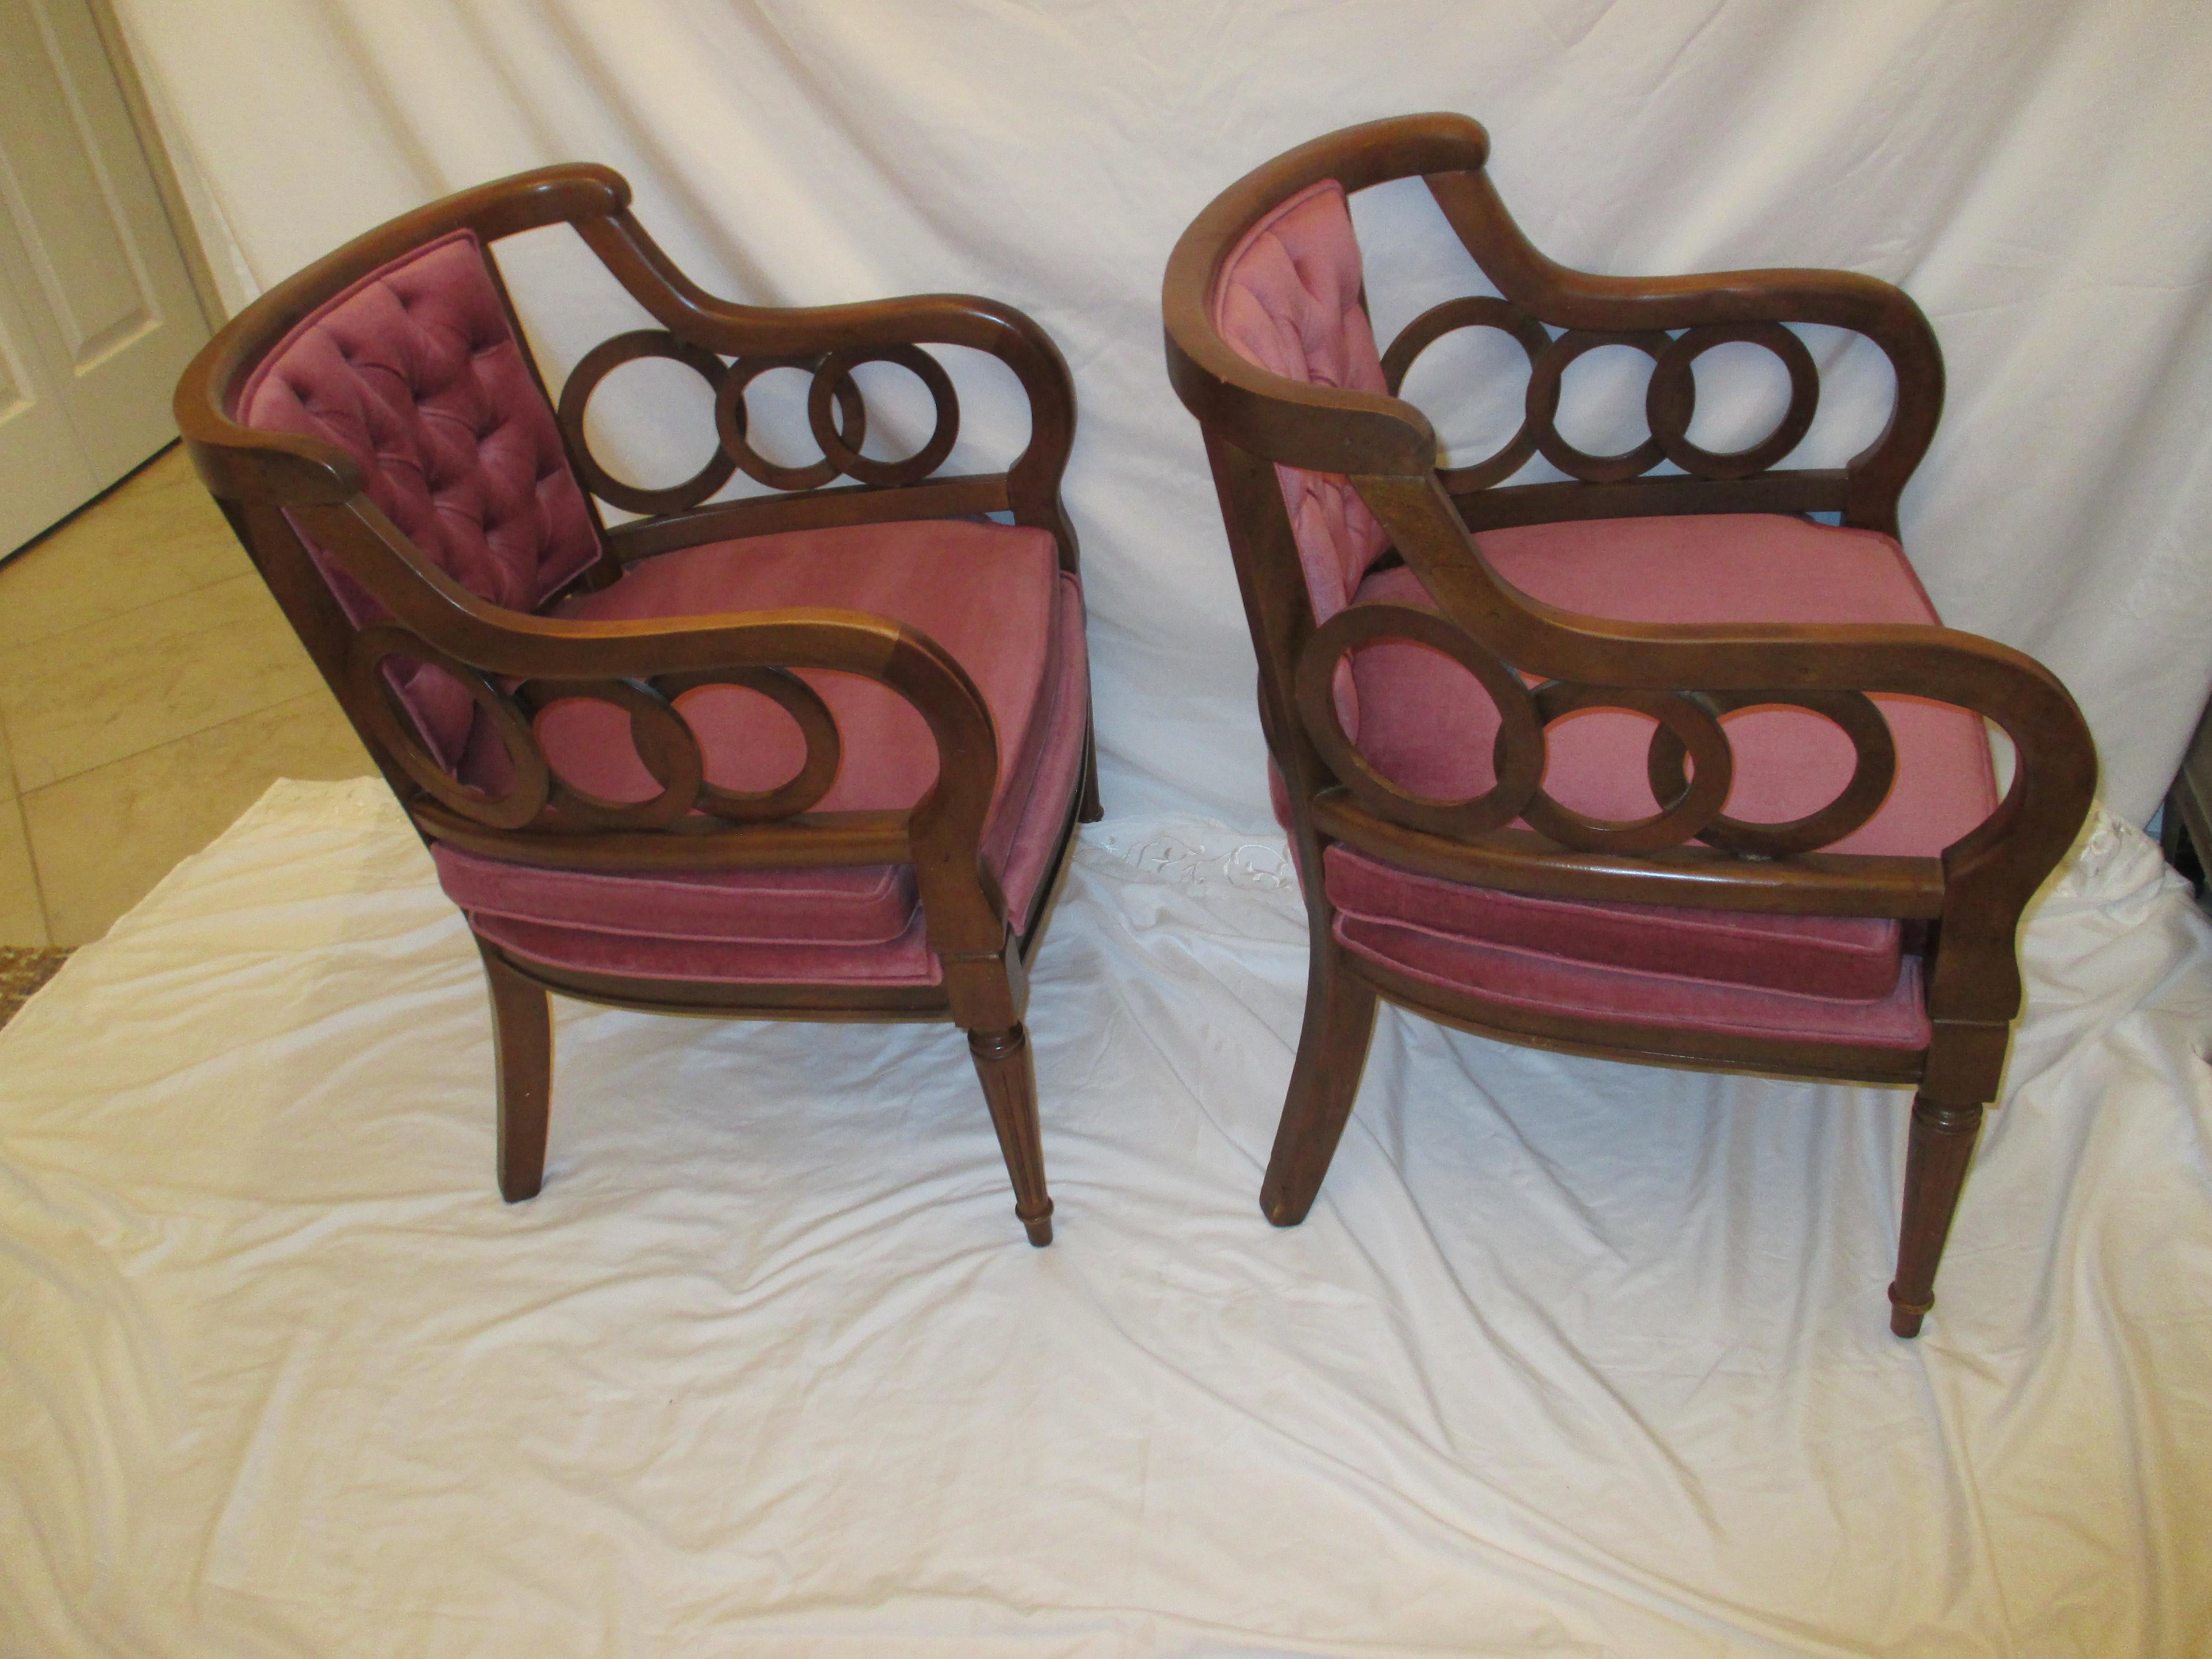 Pair of plum velvet upholstered barrel backed Hollywood Regency circle armchairs. Chairs are dark stained and have original upholstery in good condition.